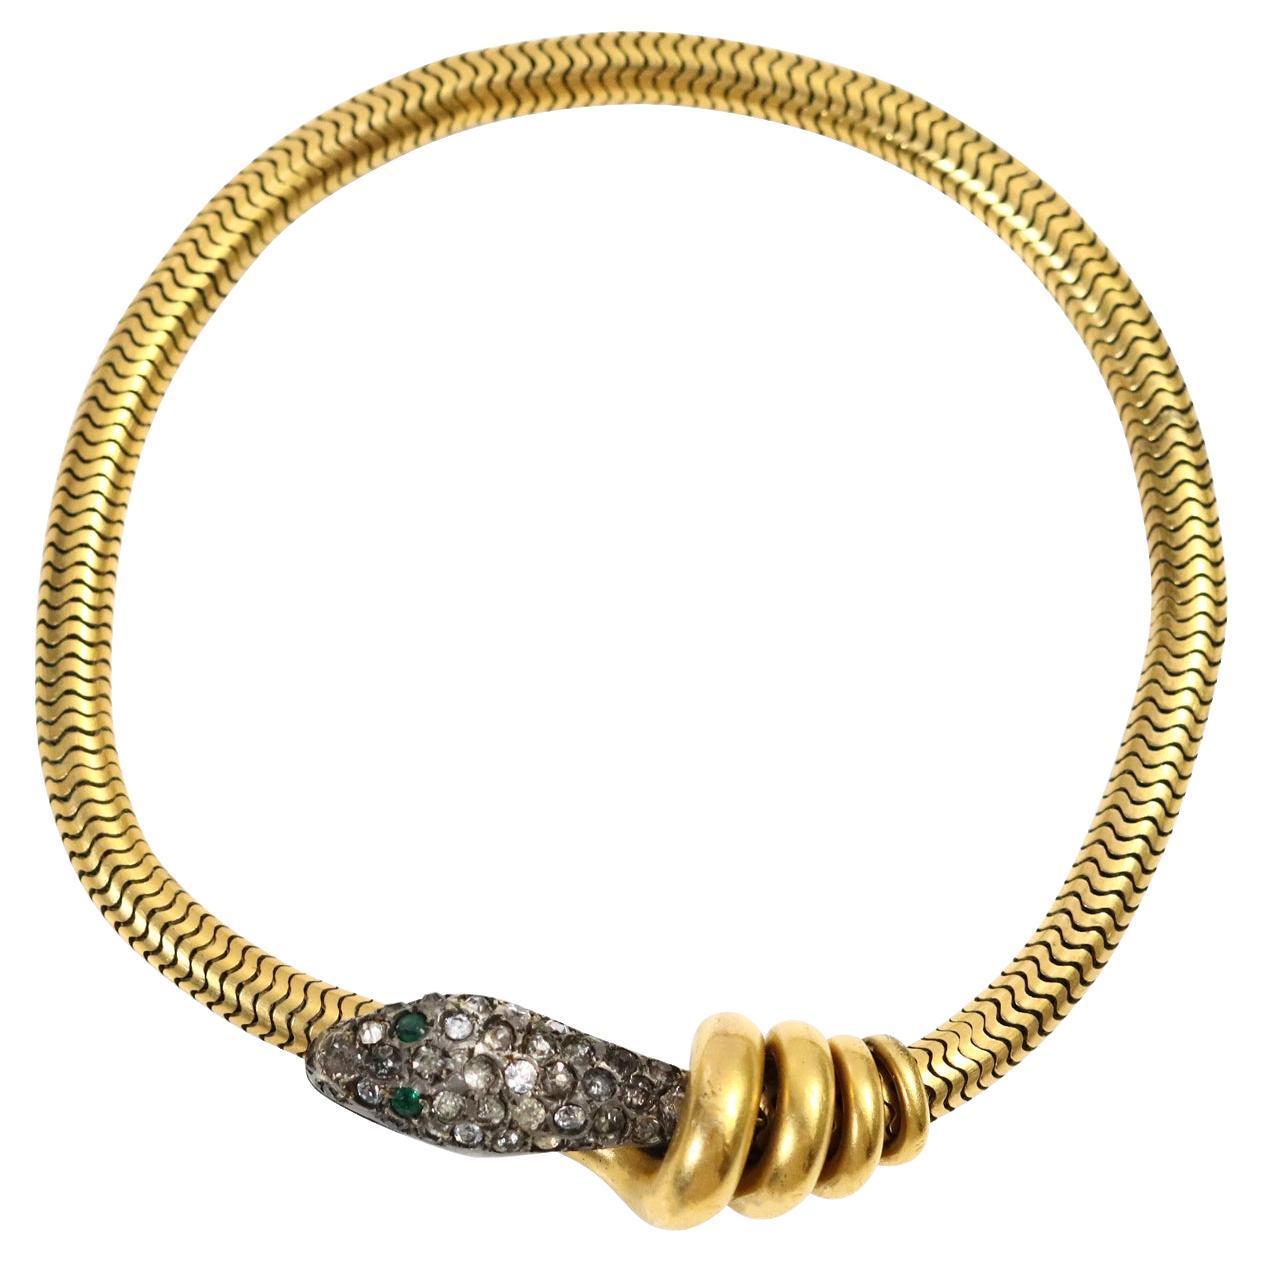 Vintage Rolled Gold Tone Diamante Dangling Snake Bracelet Circa 1940s.  I have never seen another bracelet like this. It is so special and unusual. There are $ rolls of descending sizes that have a snake head that is encrusted in black diamante with